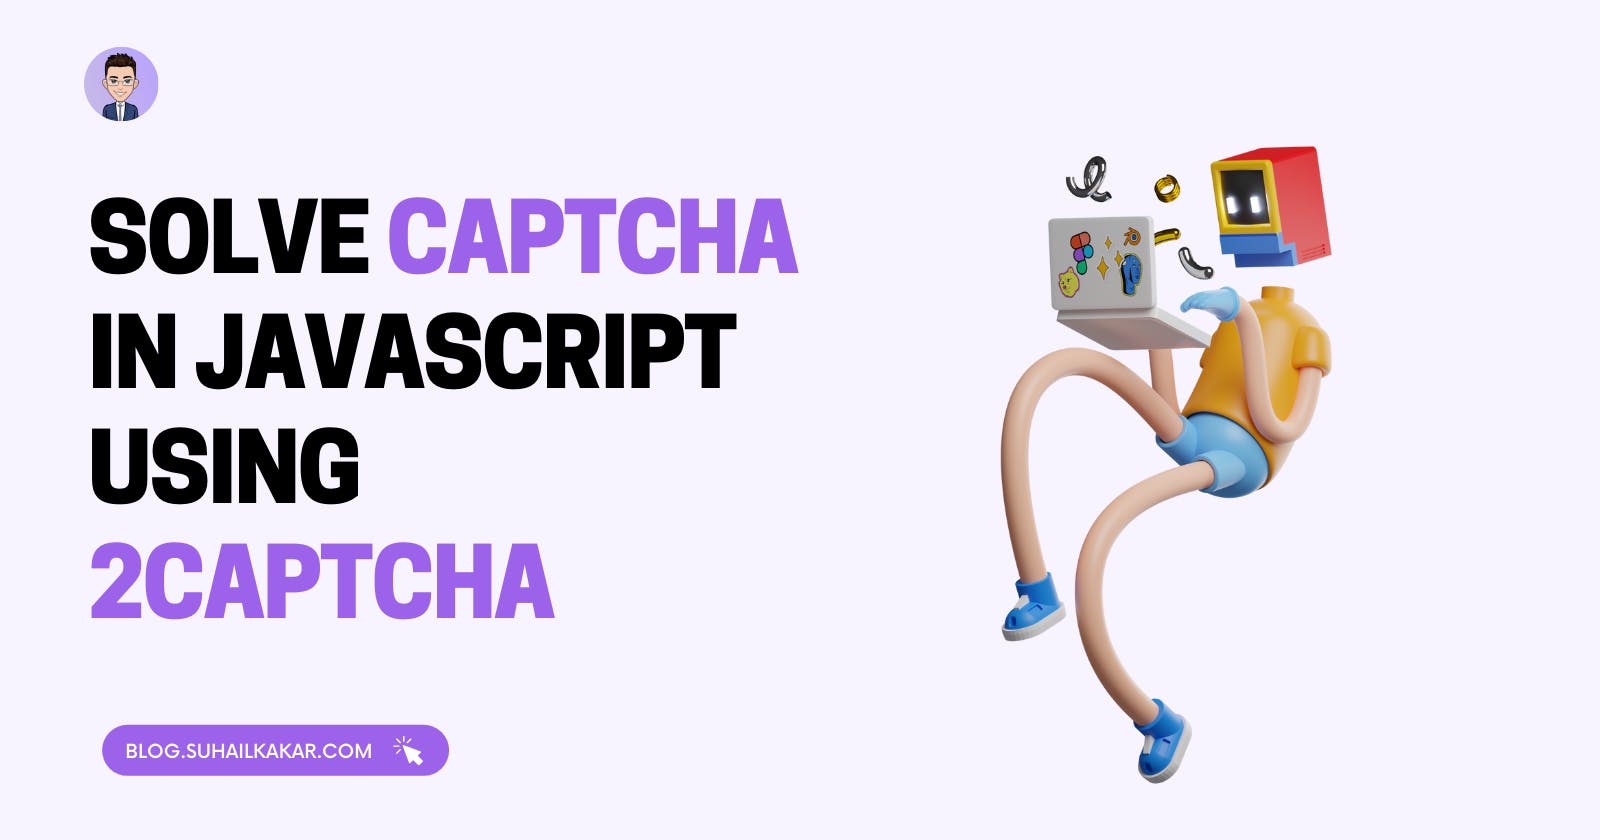 How To Solve Captcha in JavaScript Using 2Captcha